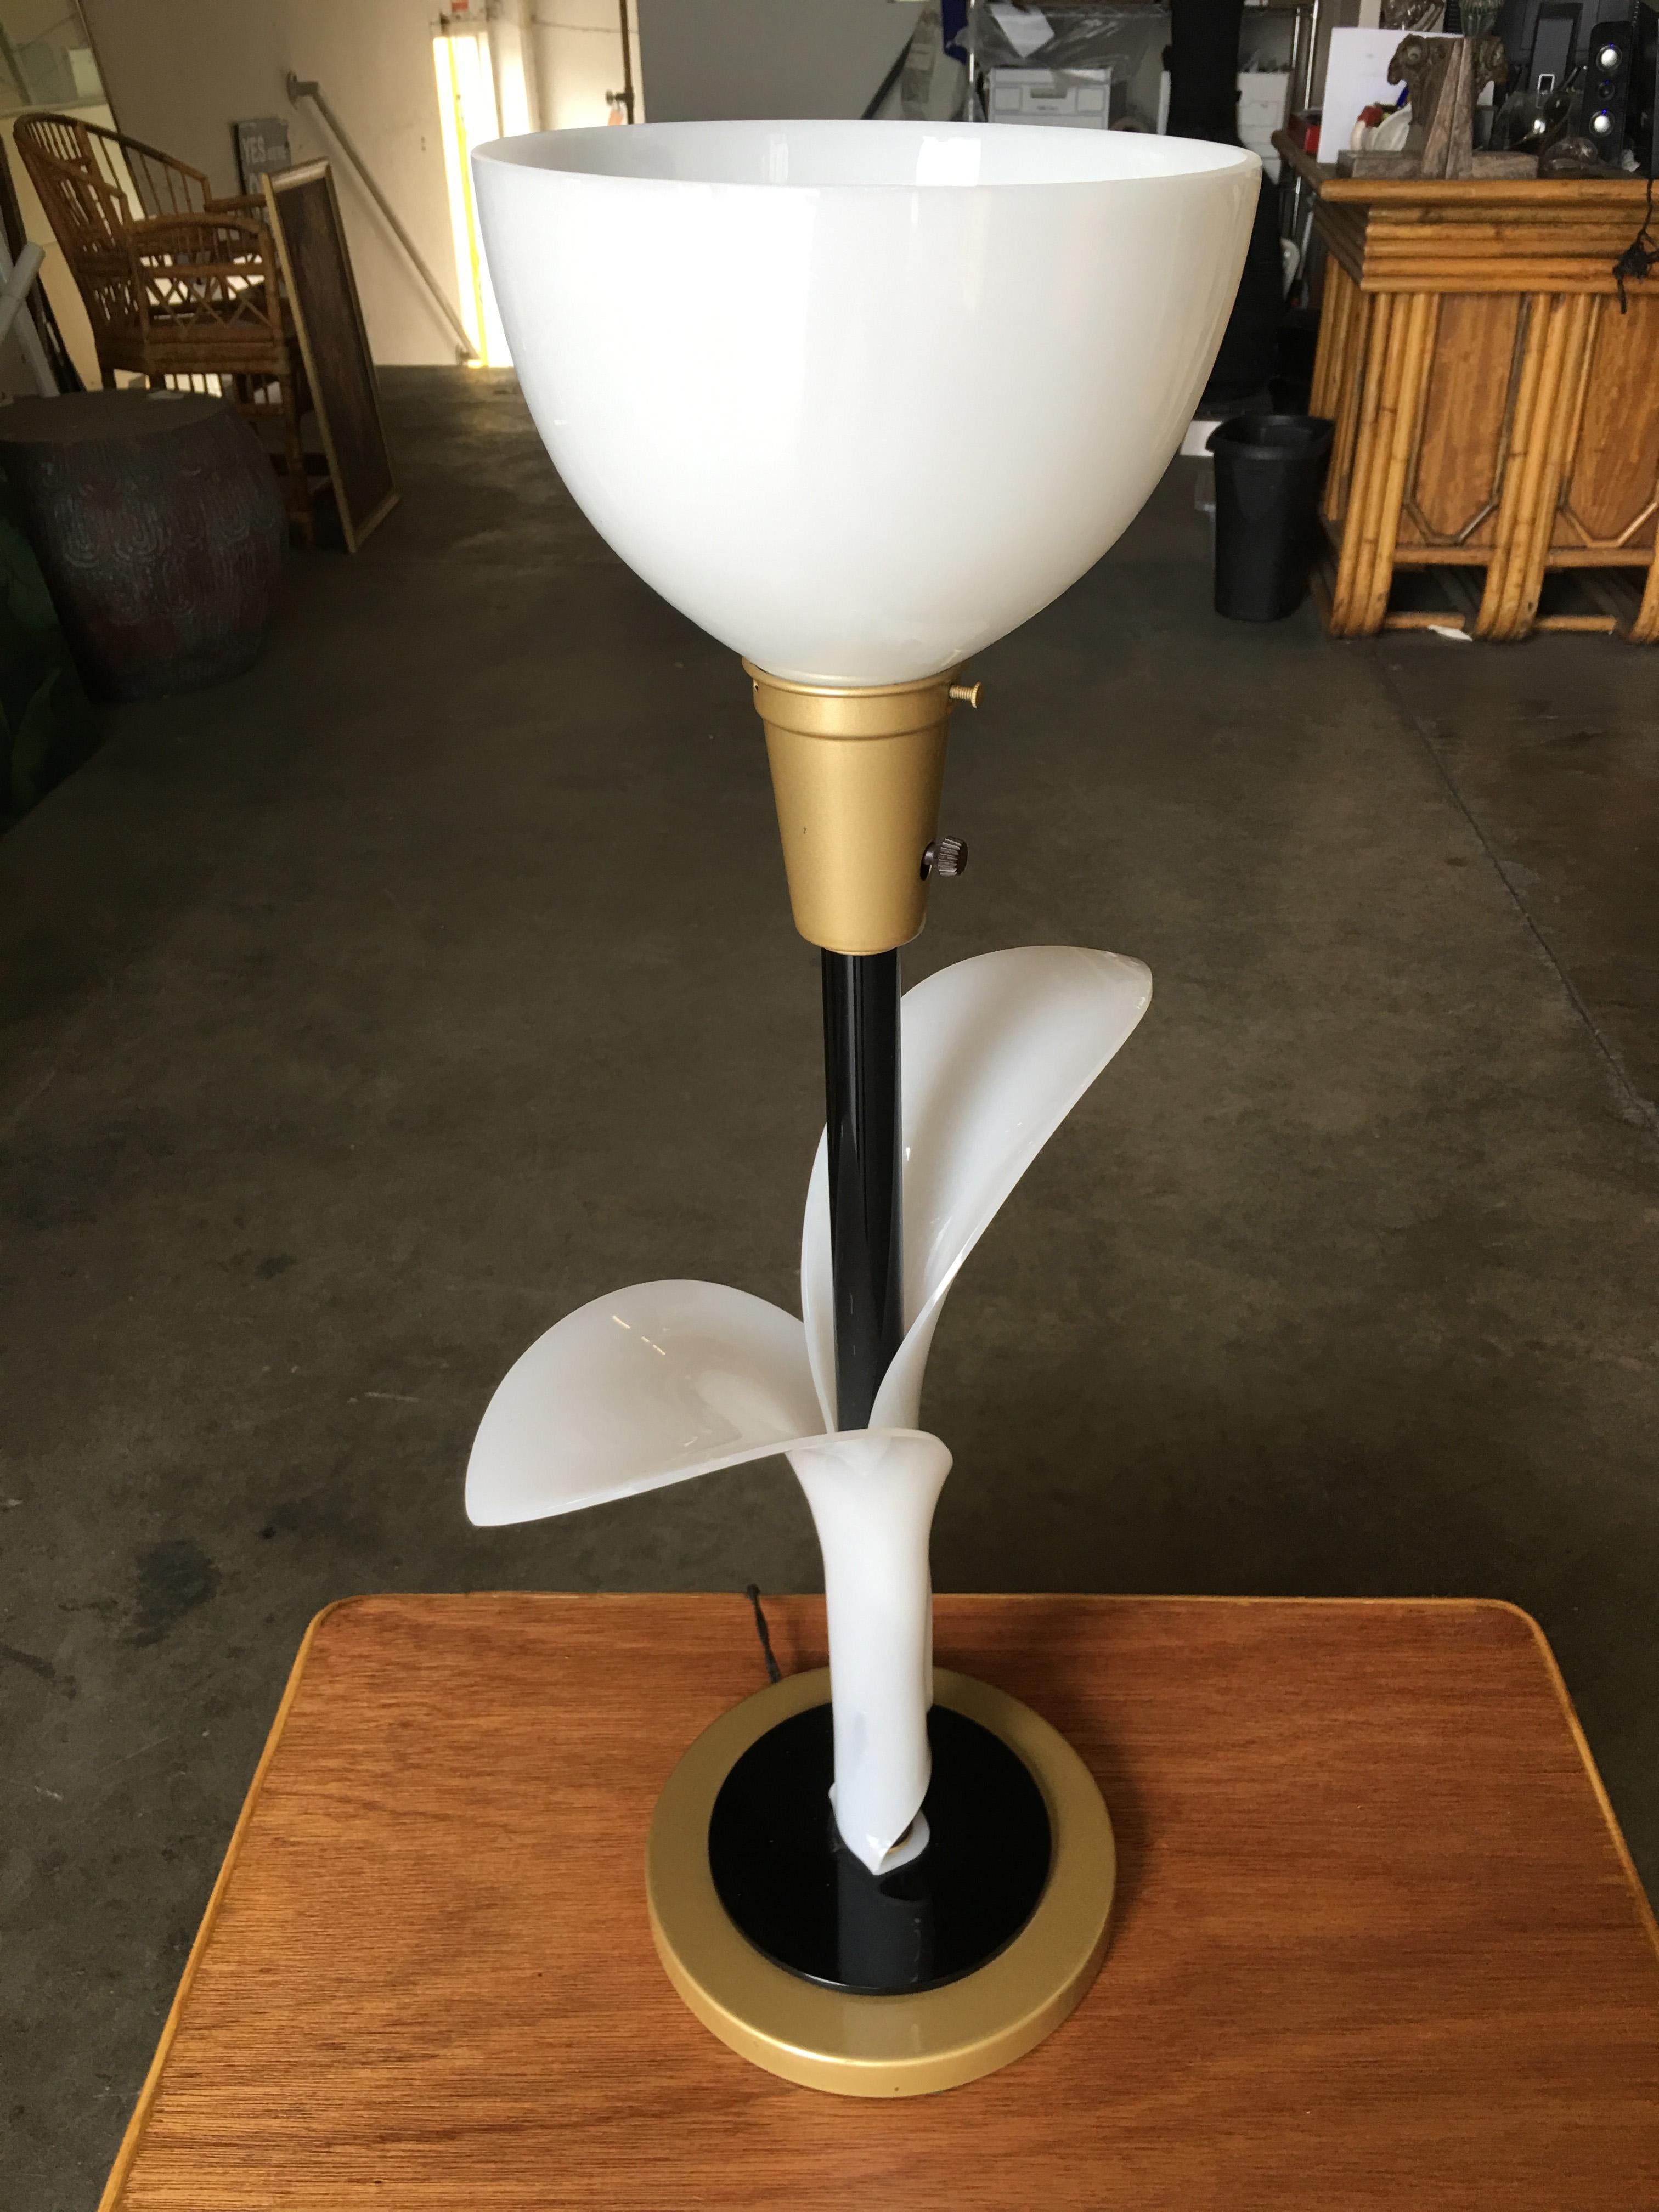 These rare set of two 1960s table lamps by Rougier lamp, feature leaf-shaped shafts elegantly rendered in ivory-toned acrylic. The acrylic envelops the brass base and black painted spine. The lamps are finished with an ivory glass shade.